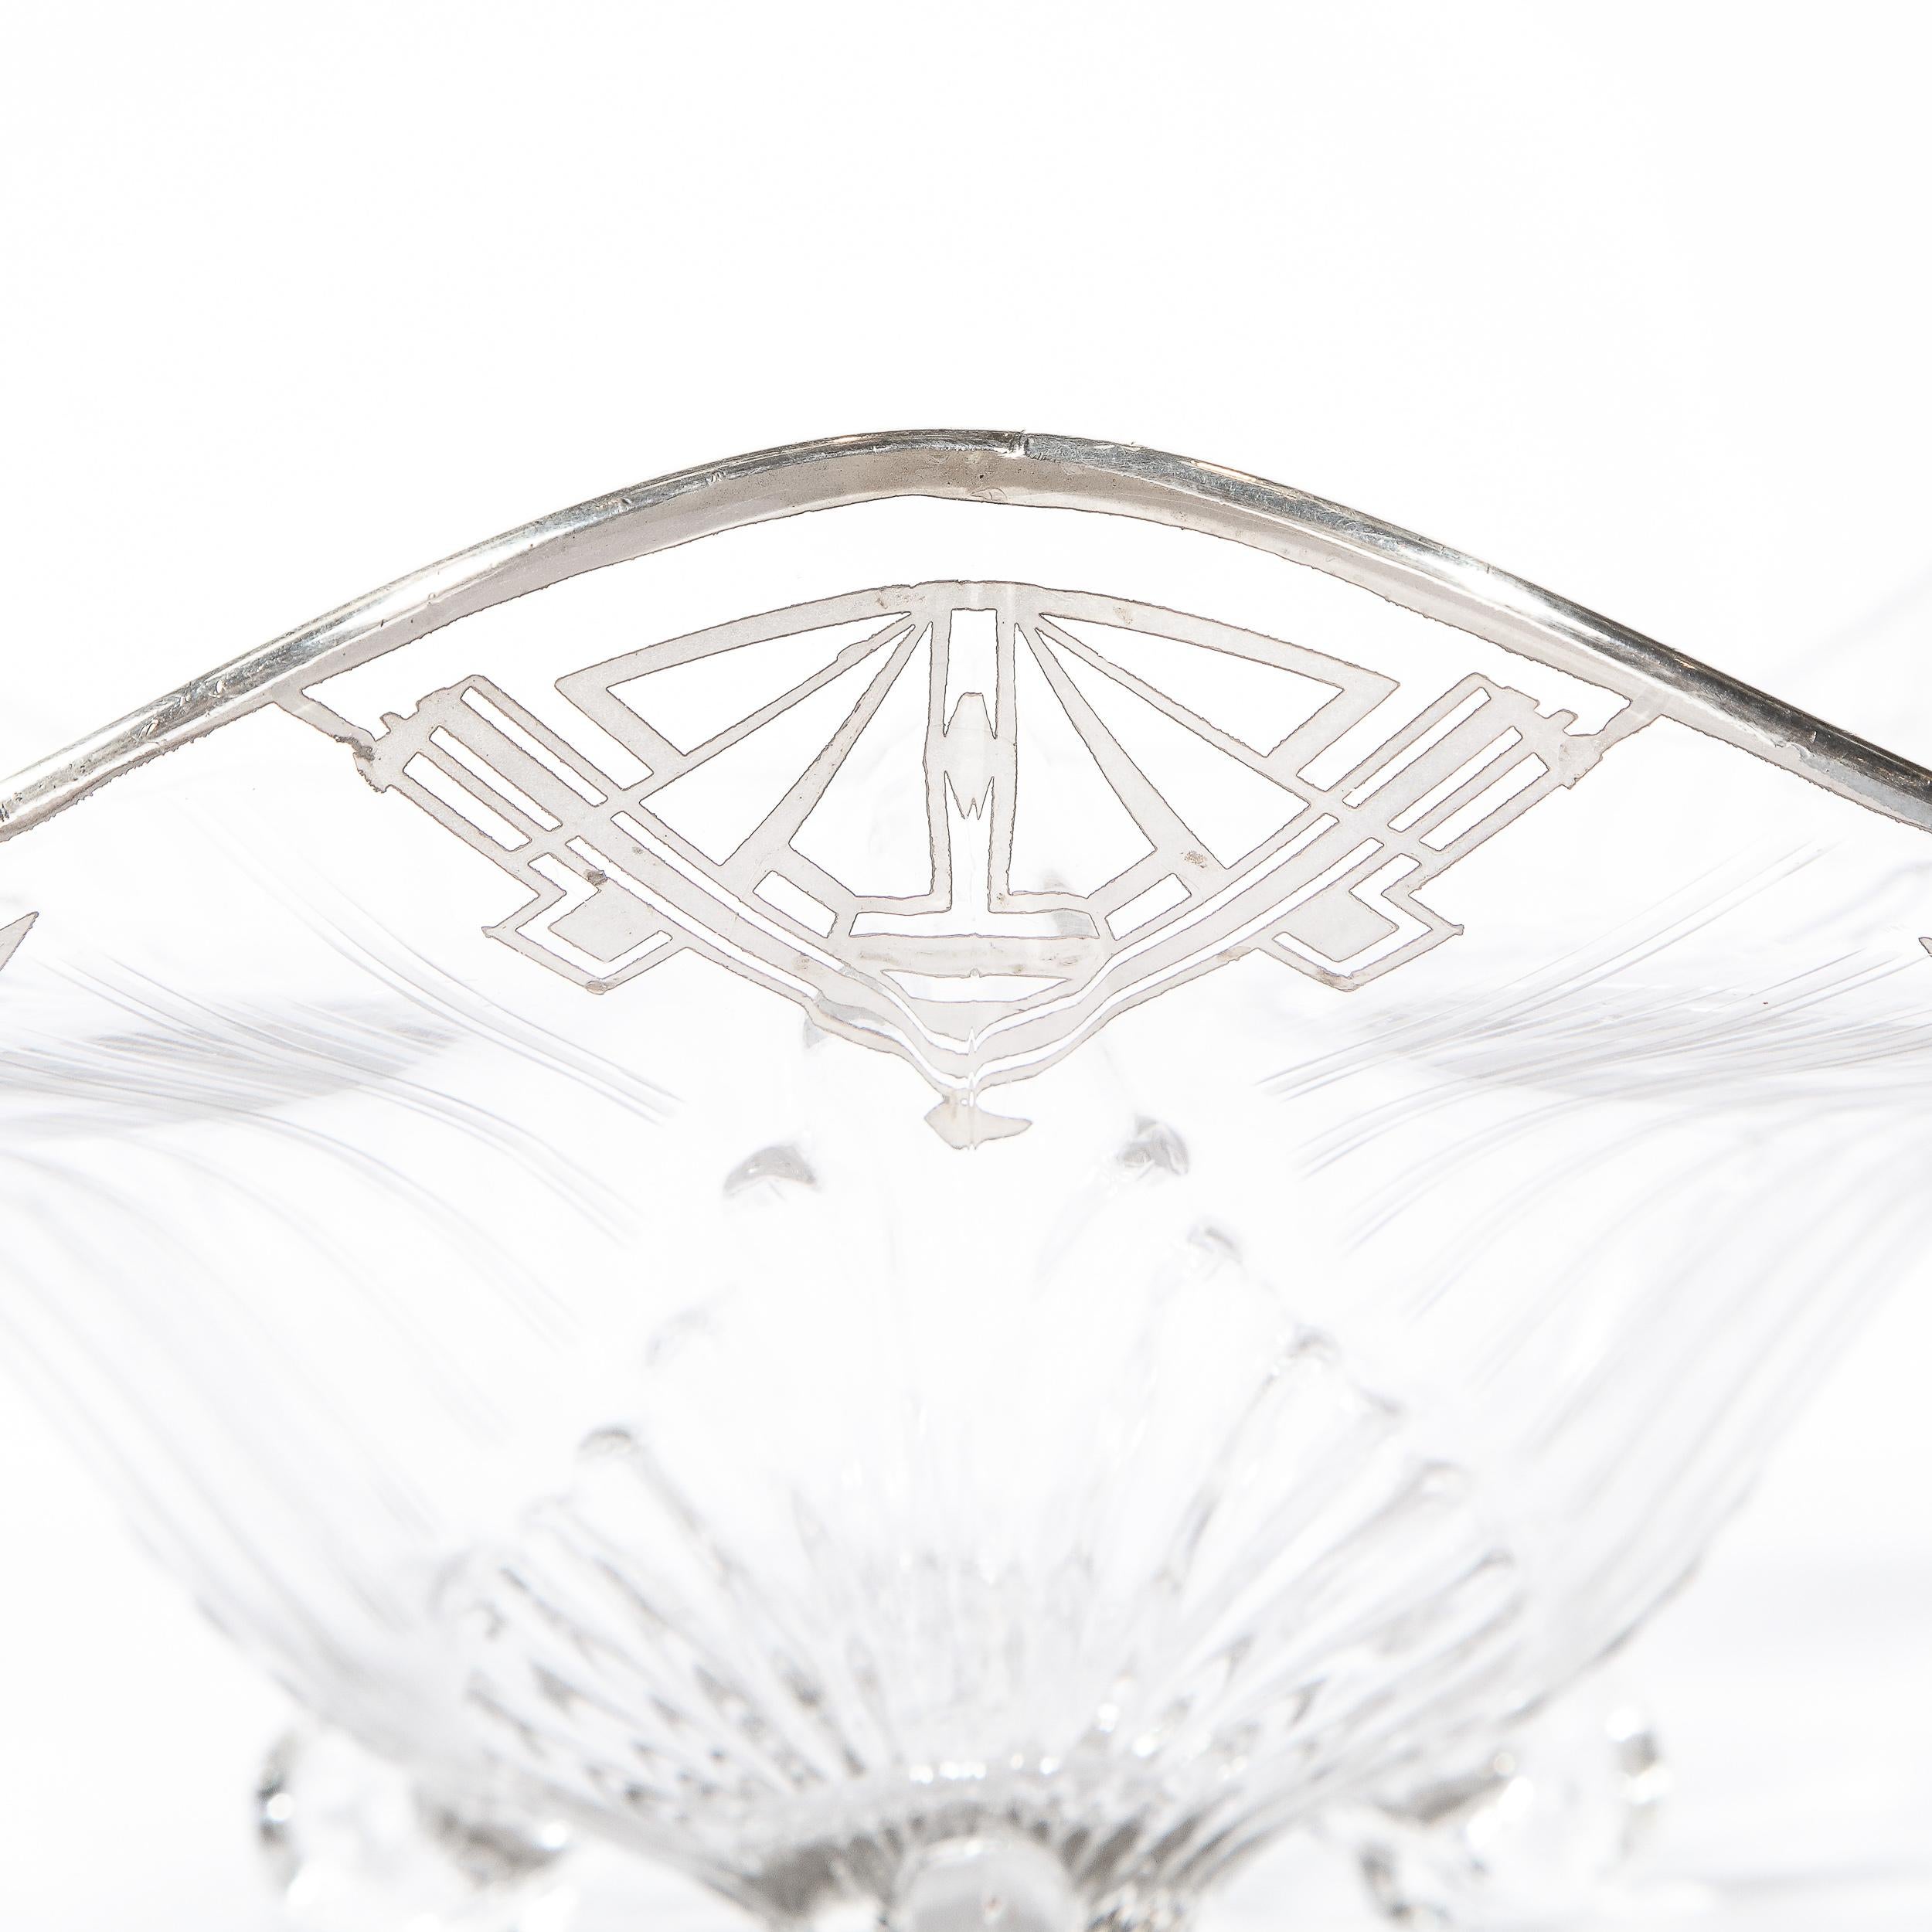 Mid-20th Century Art Deco Machine Age Translucent Glass Center Bowl with Sterling Silver Overlay For Sale